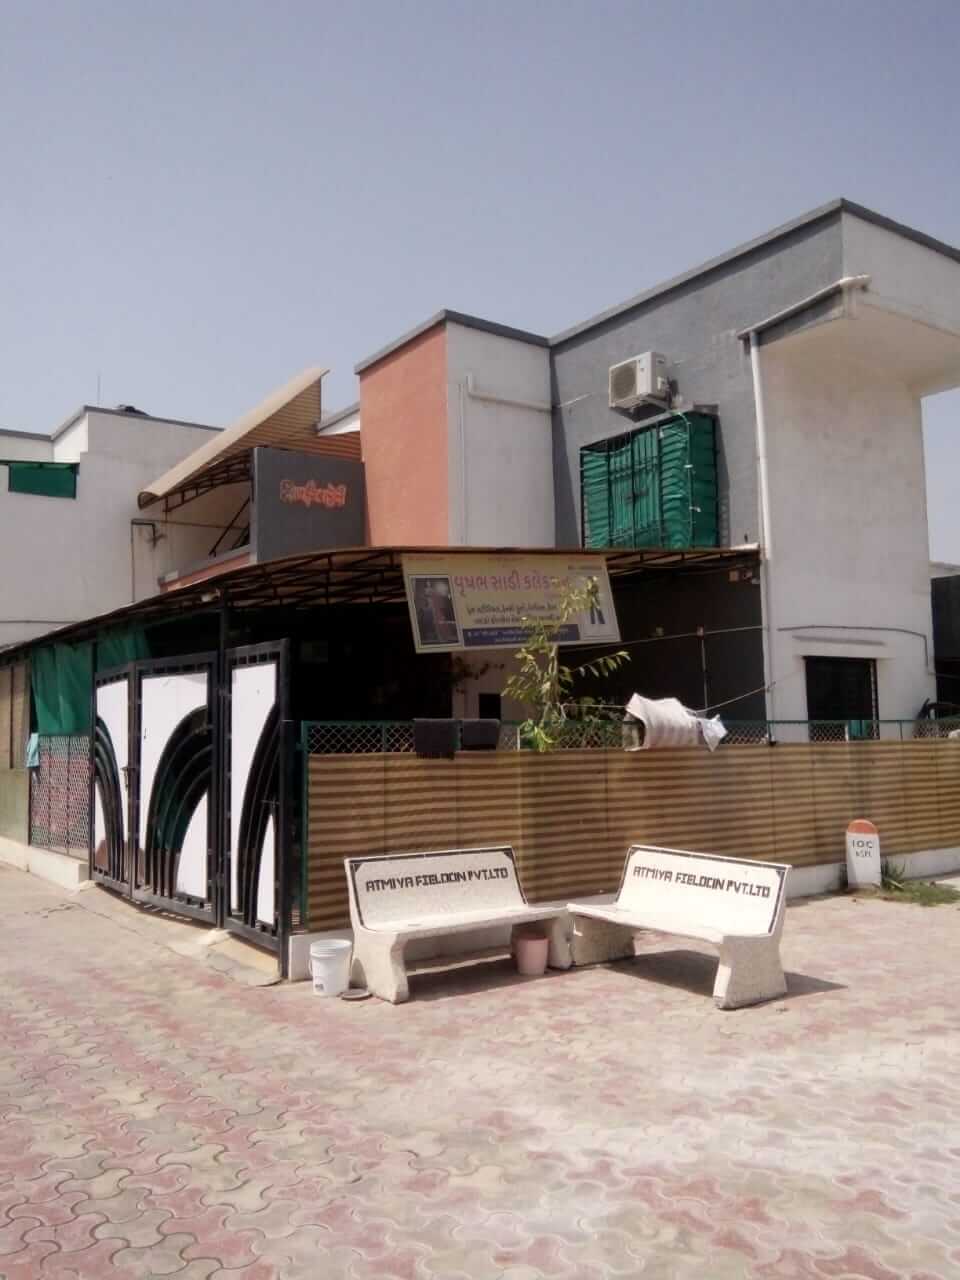 3 BHK House for Sell Near Bakrol, Ananad 388315 for 52,00,000 Rs. Negotiable